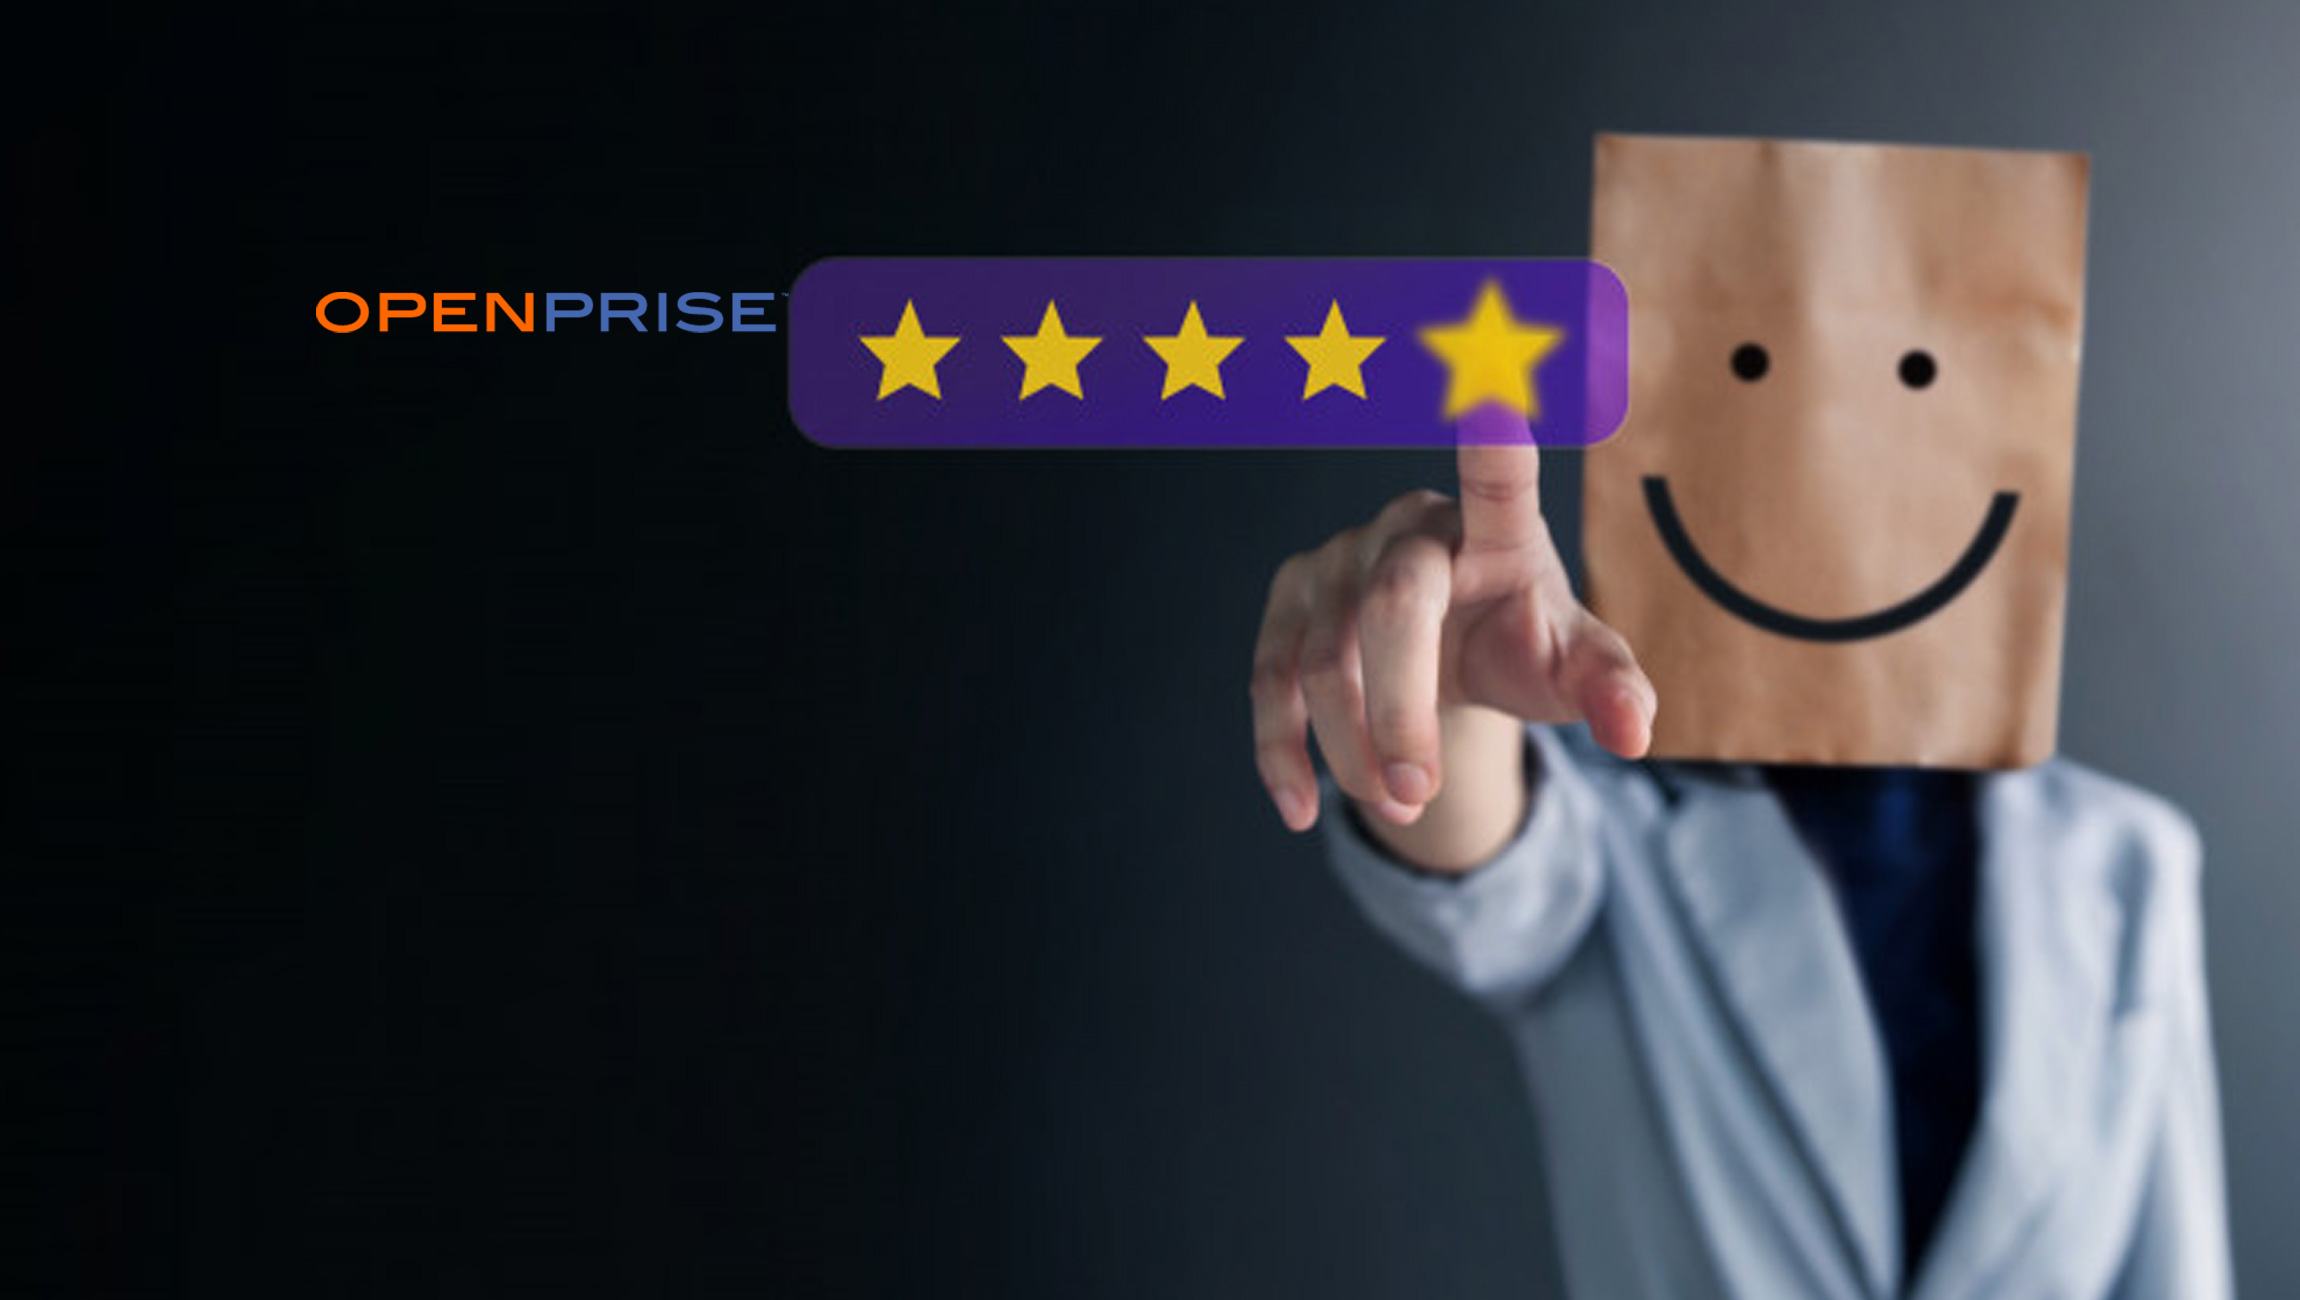 Openprise Ranks #1 for Customer Satisfaction for the Third Consecutive Quarter in Fall 2019 G2 Enterprise Grid Report